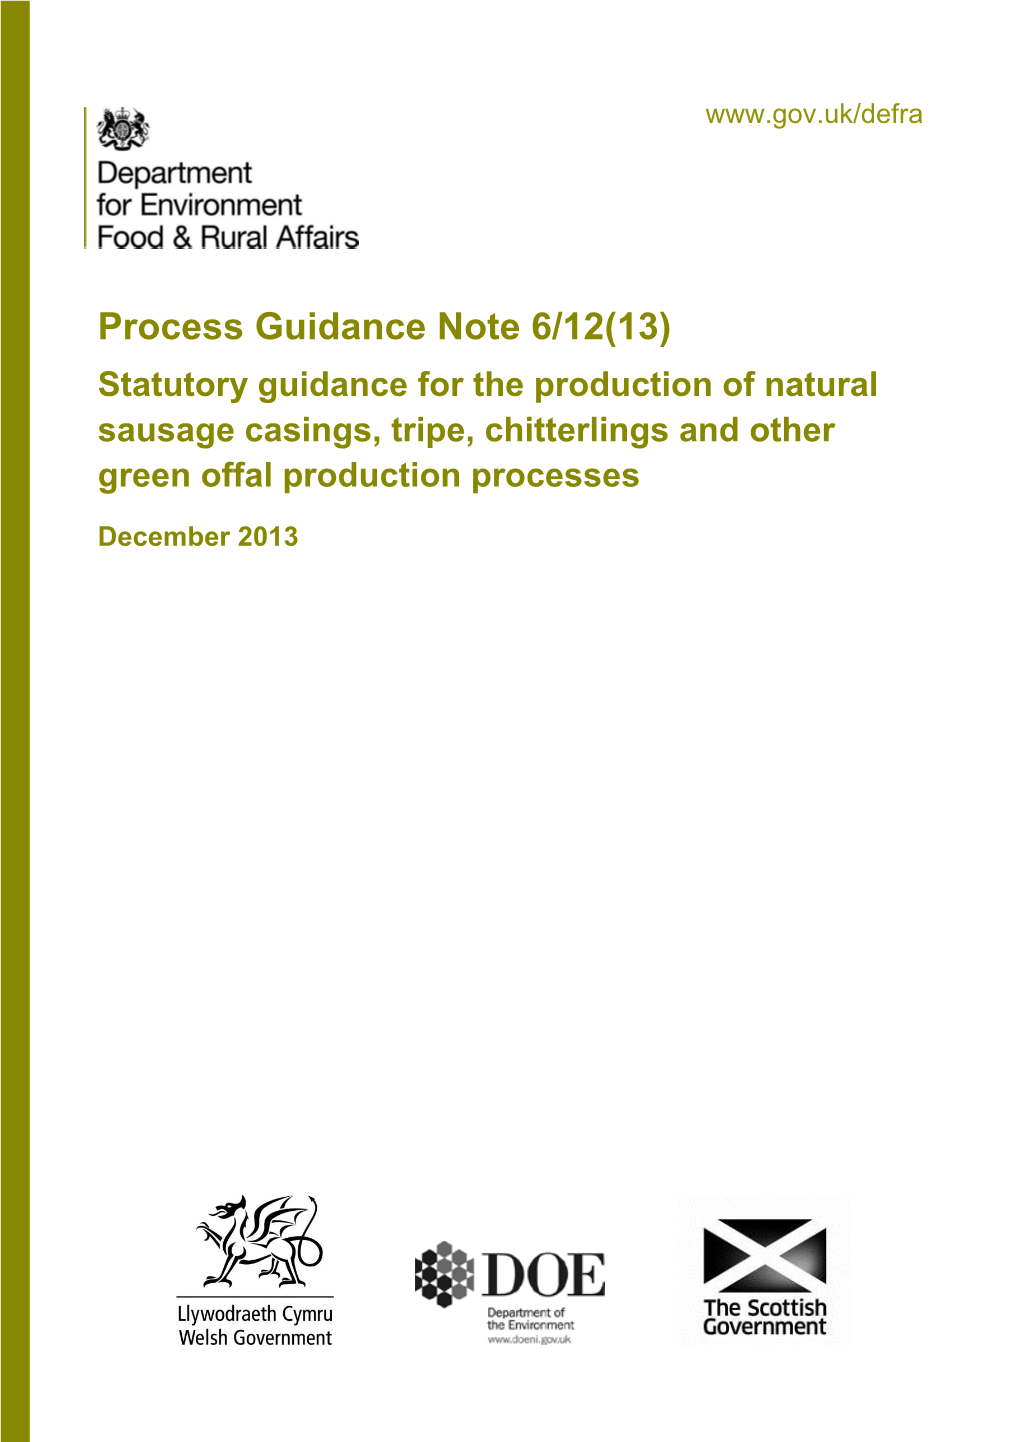 Statutory Guidance for the Production of Natural Sausage Casings, Tripe, Chitterlings and Other Green Offal Production Processes